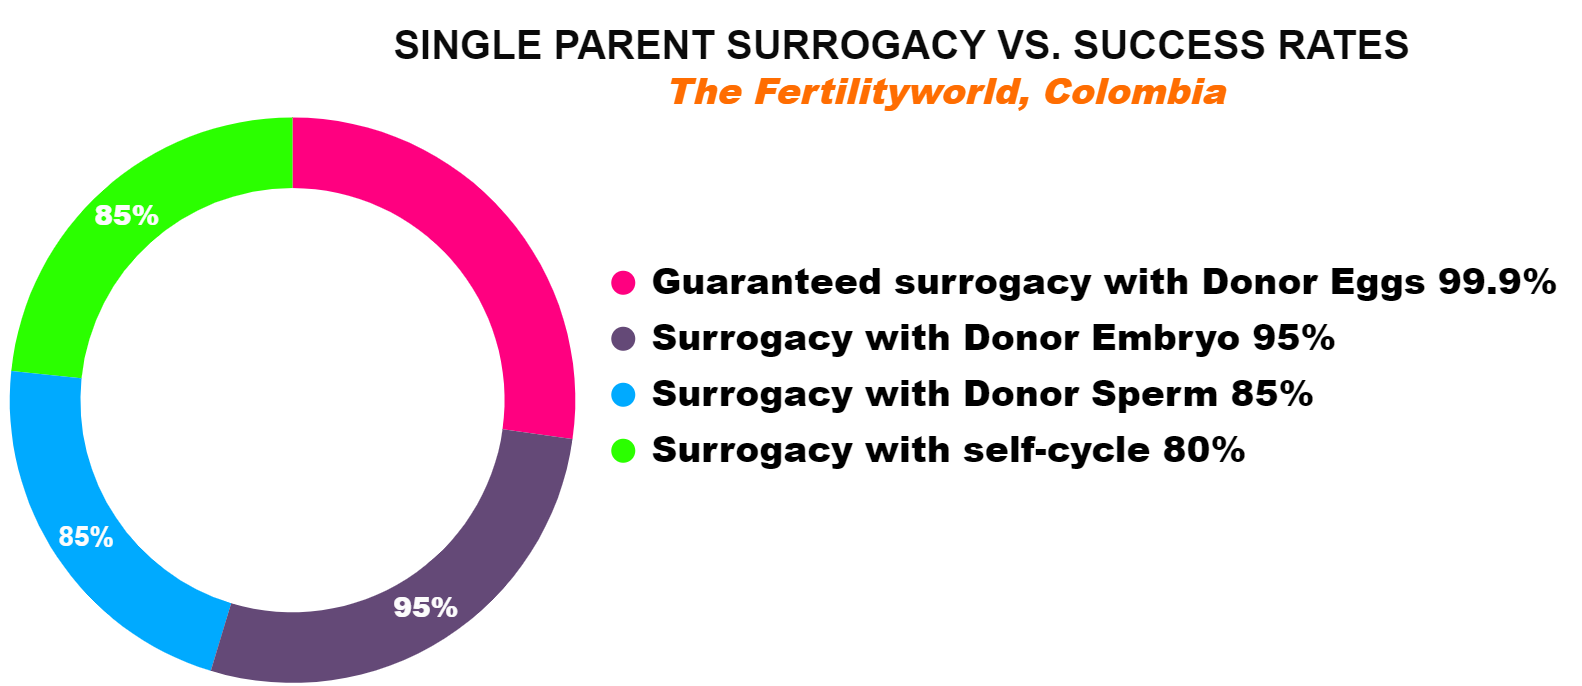 Single parent’s surrogacy success rates in Colombia